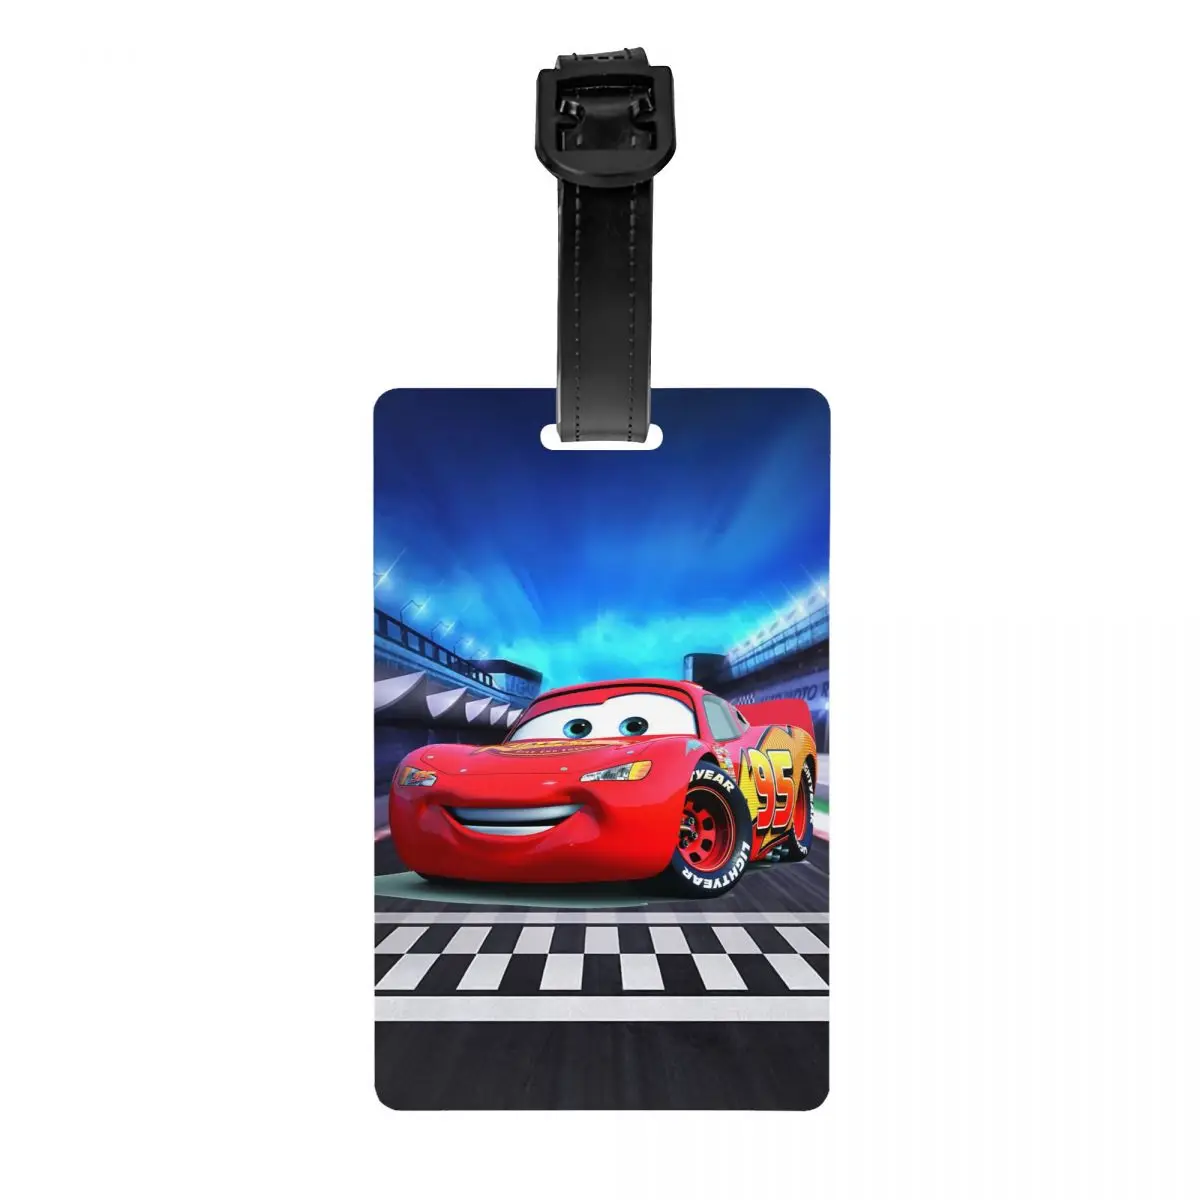 

Custom Cartoon Pixar Cars Luggage Tag Privacy Protection Baggage Tags Travel Bag Labels Suitcase